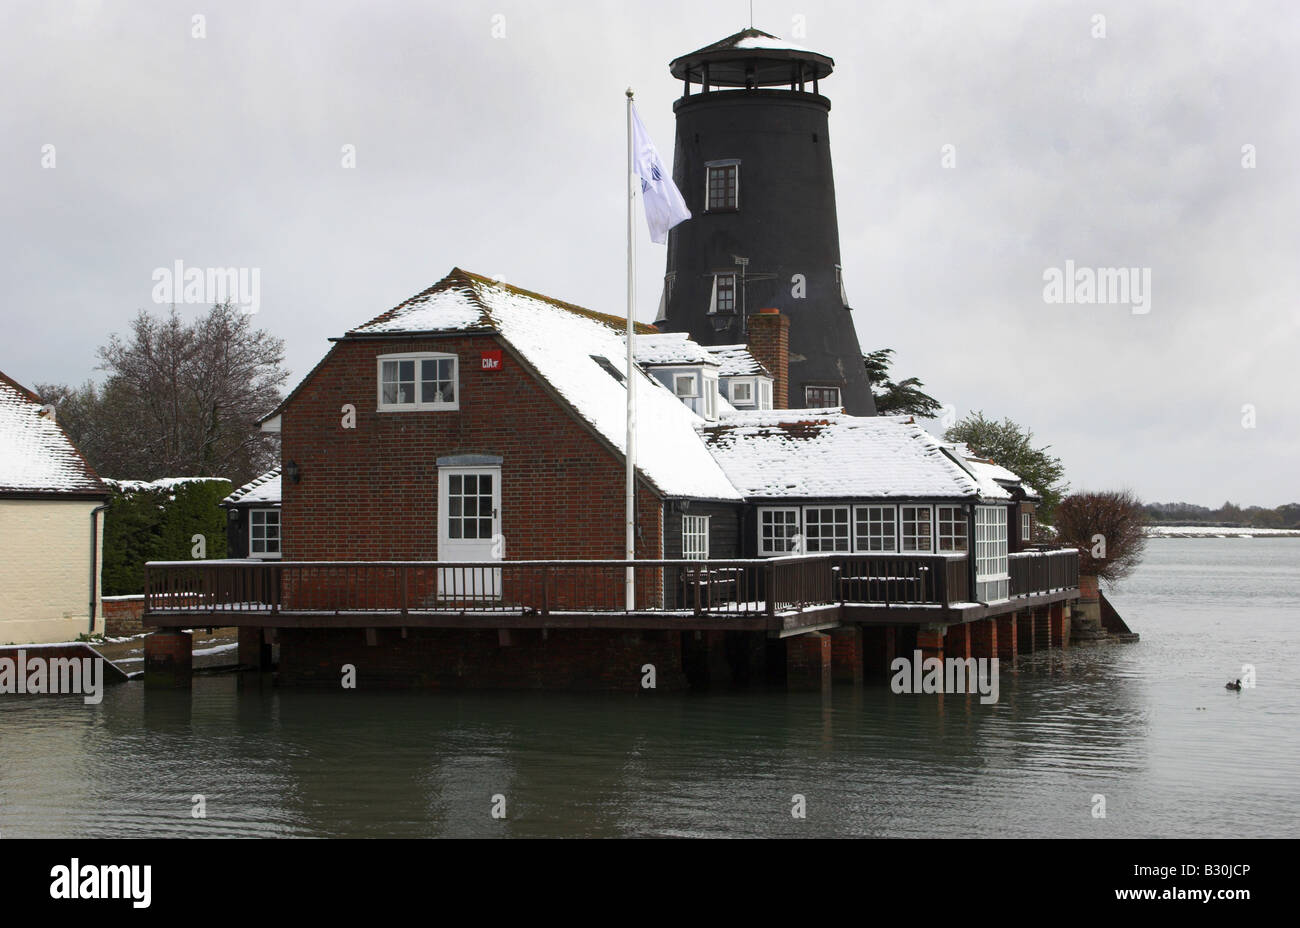 The Mill in the snow, Langstone Stock Photo